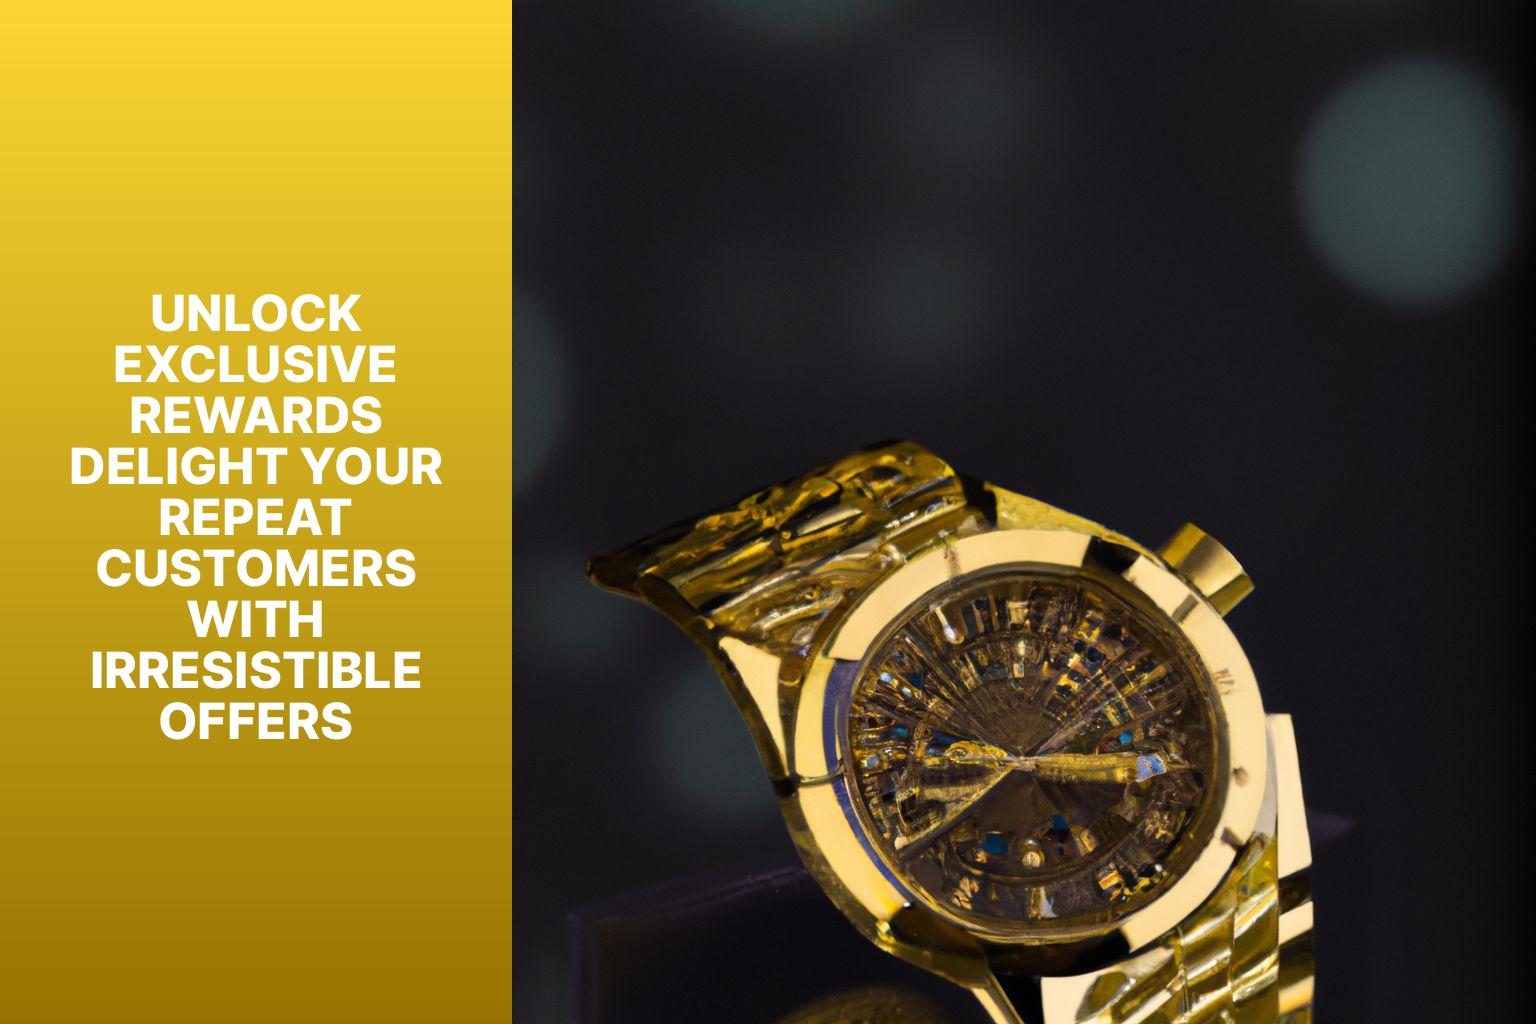 Unlock Exclusive Rewards Delight Your Repeat Customers with Irresistible Offers